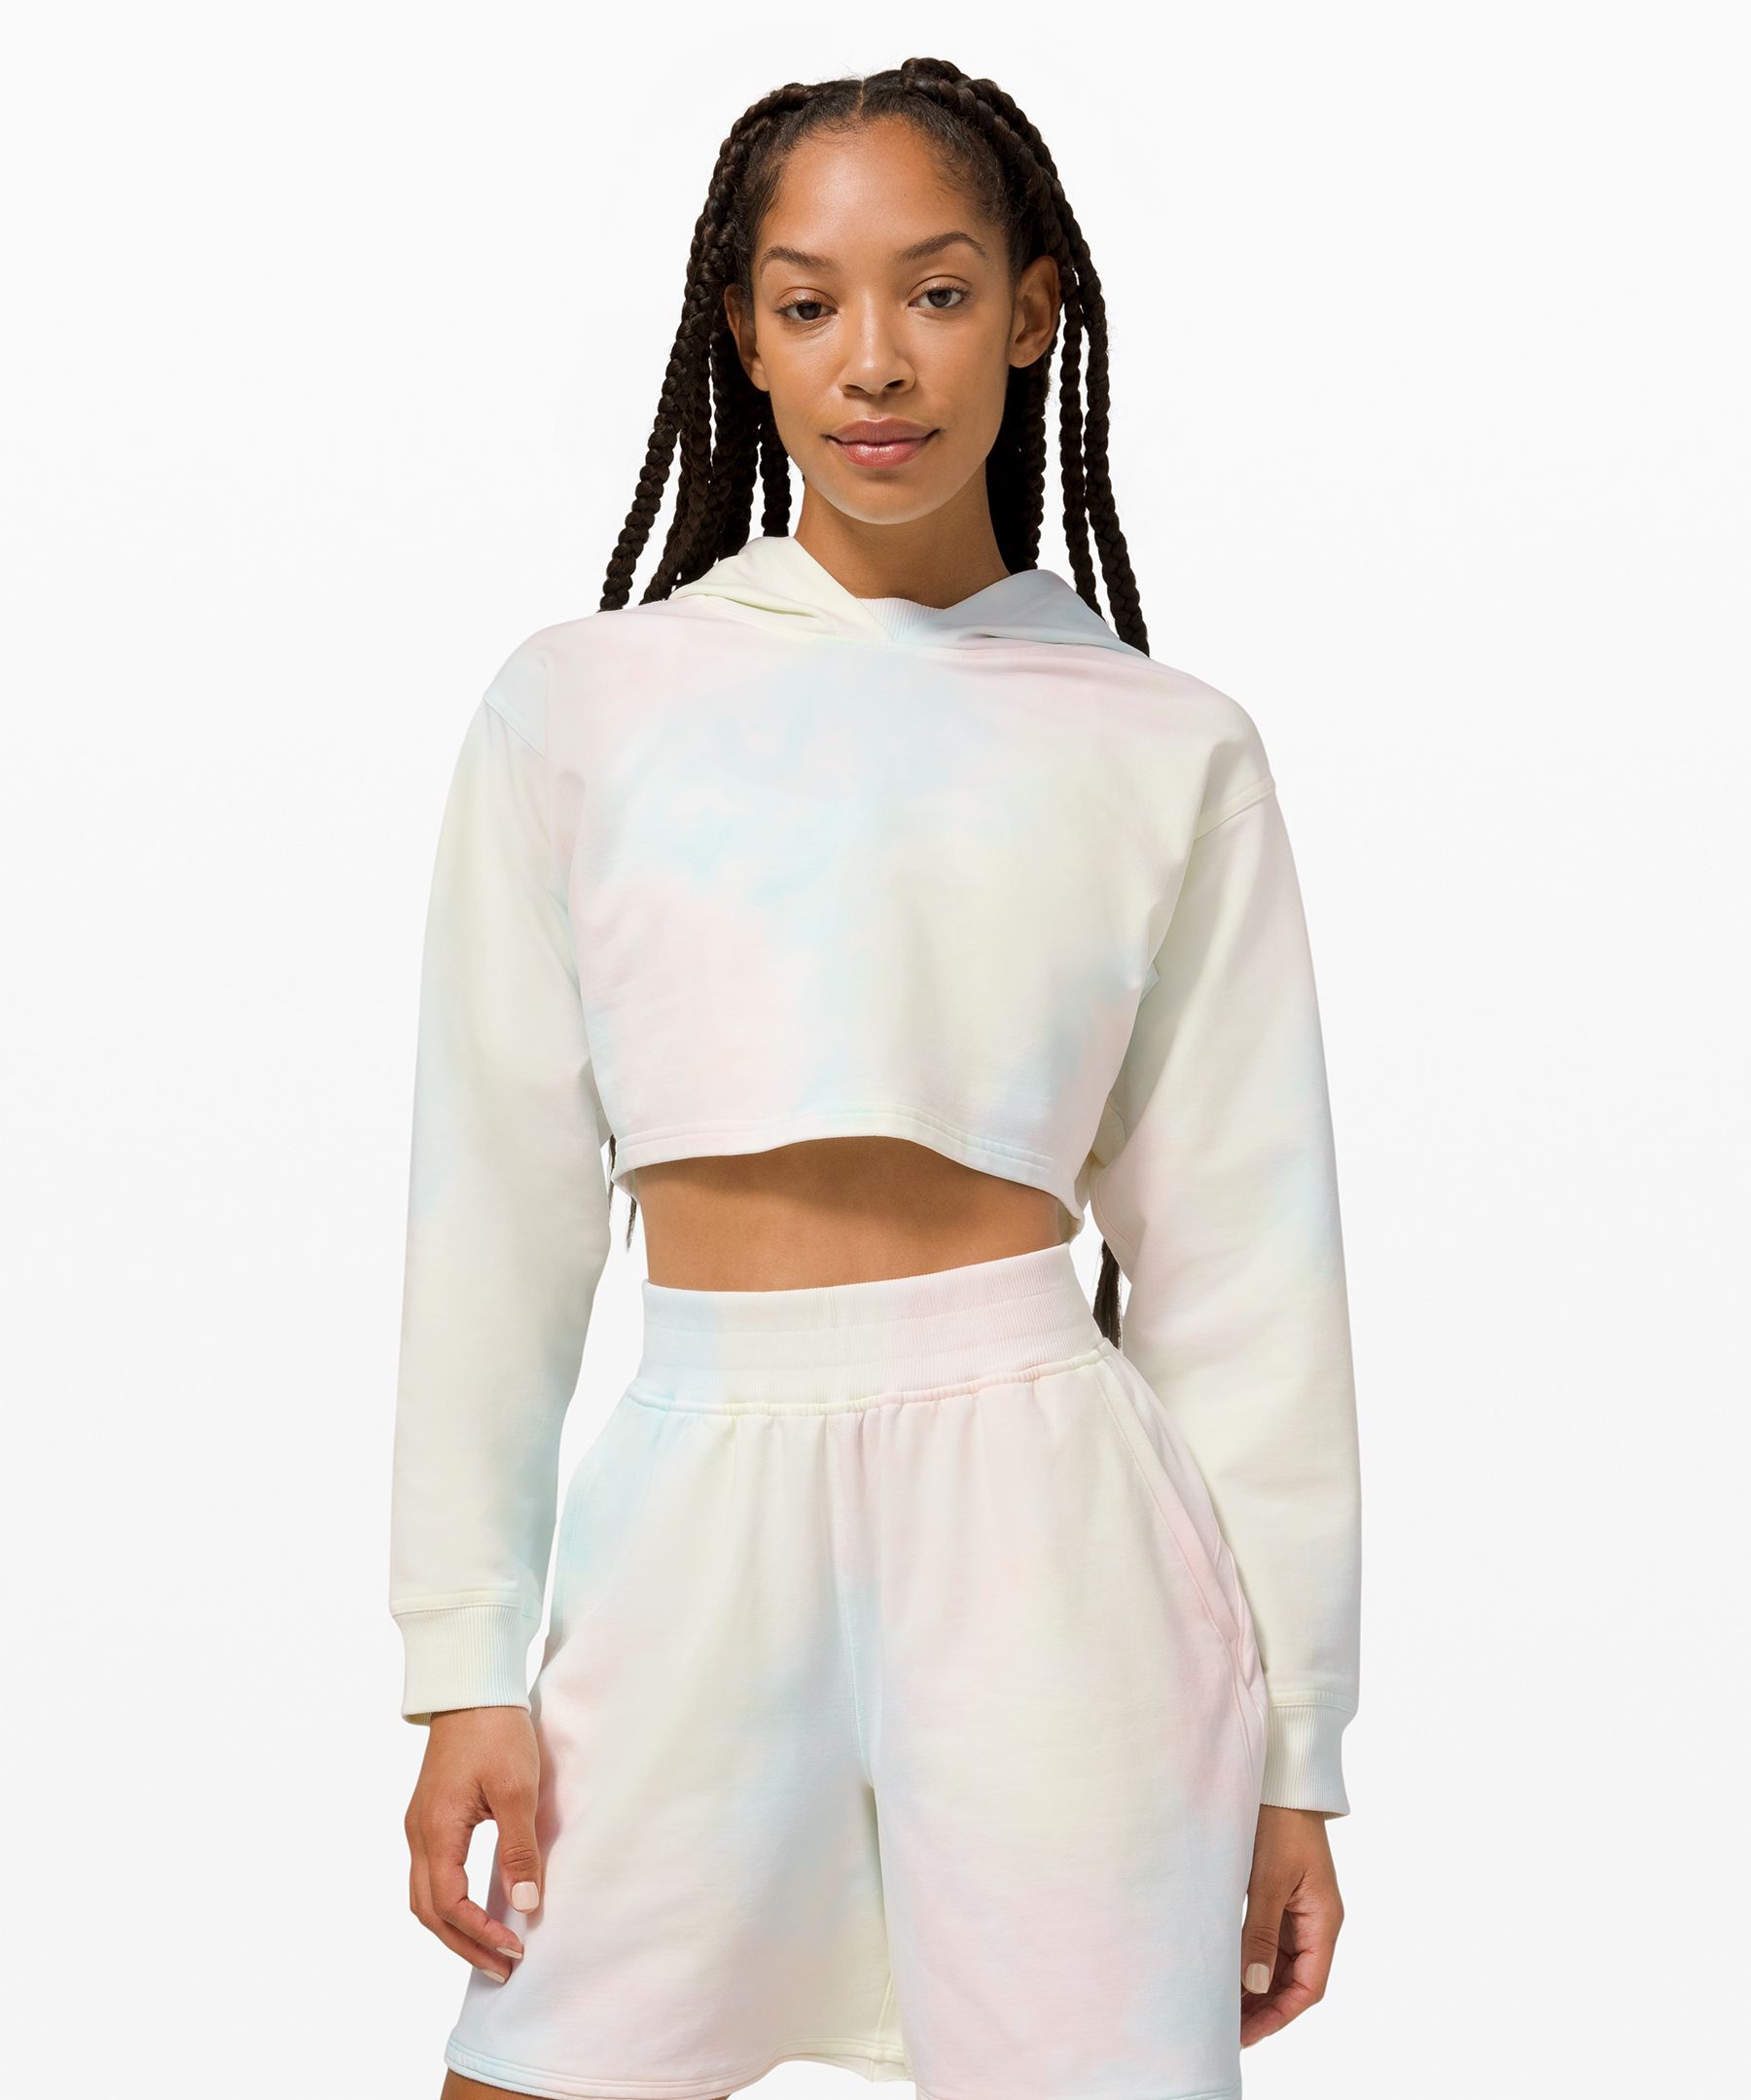 Lululemon La All Yours Cropped Hoodie In Cotton Candy Wash - White/miami Teal/lemon Vibe/ Mist Pink